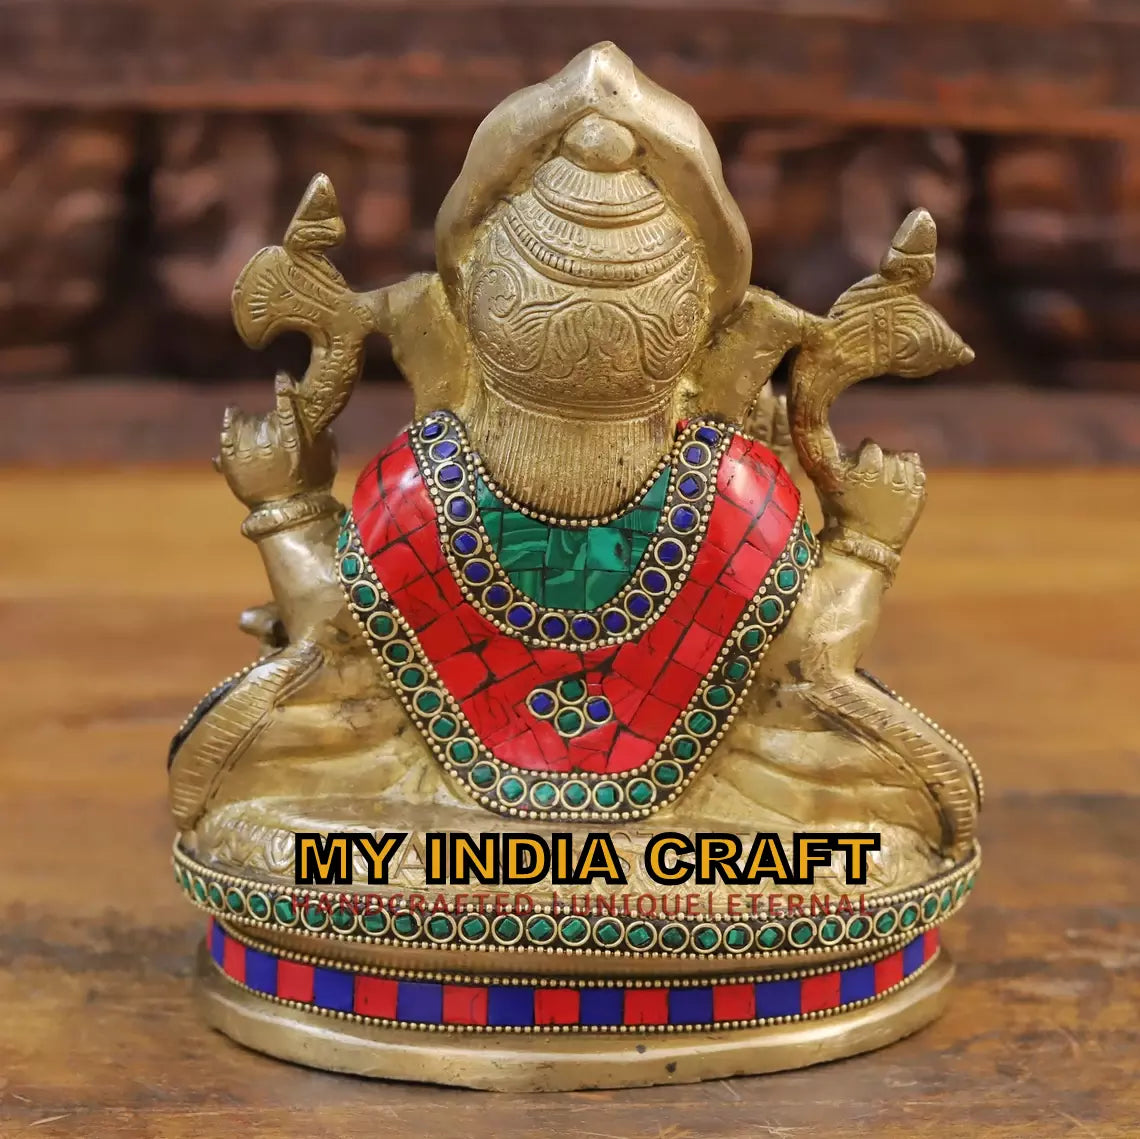 Gifts to India Online | Gifts from USA to India - Giftsmyntra.com